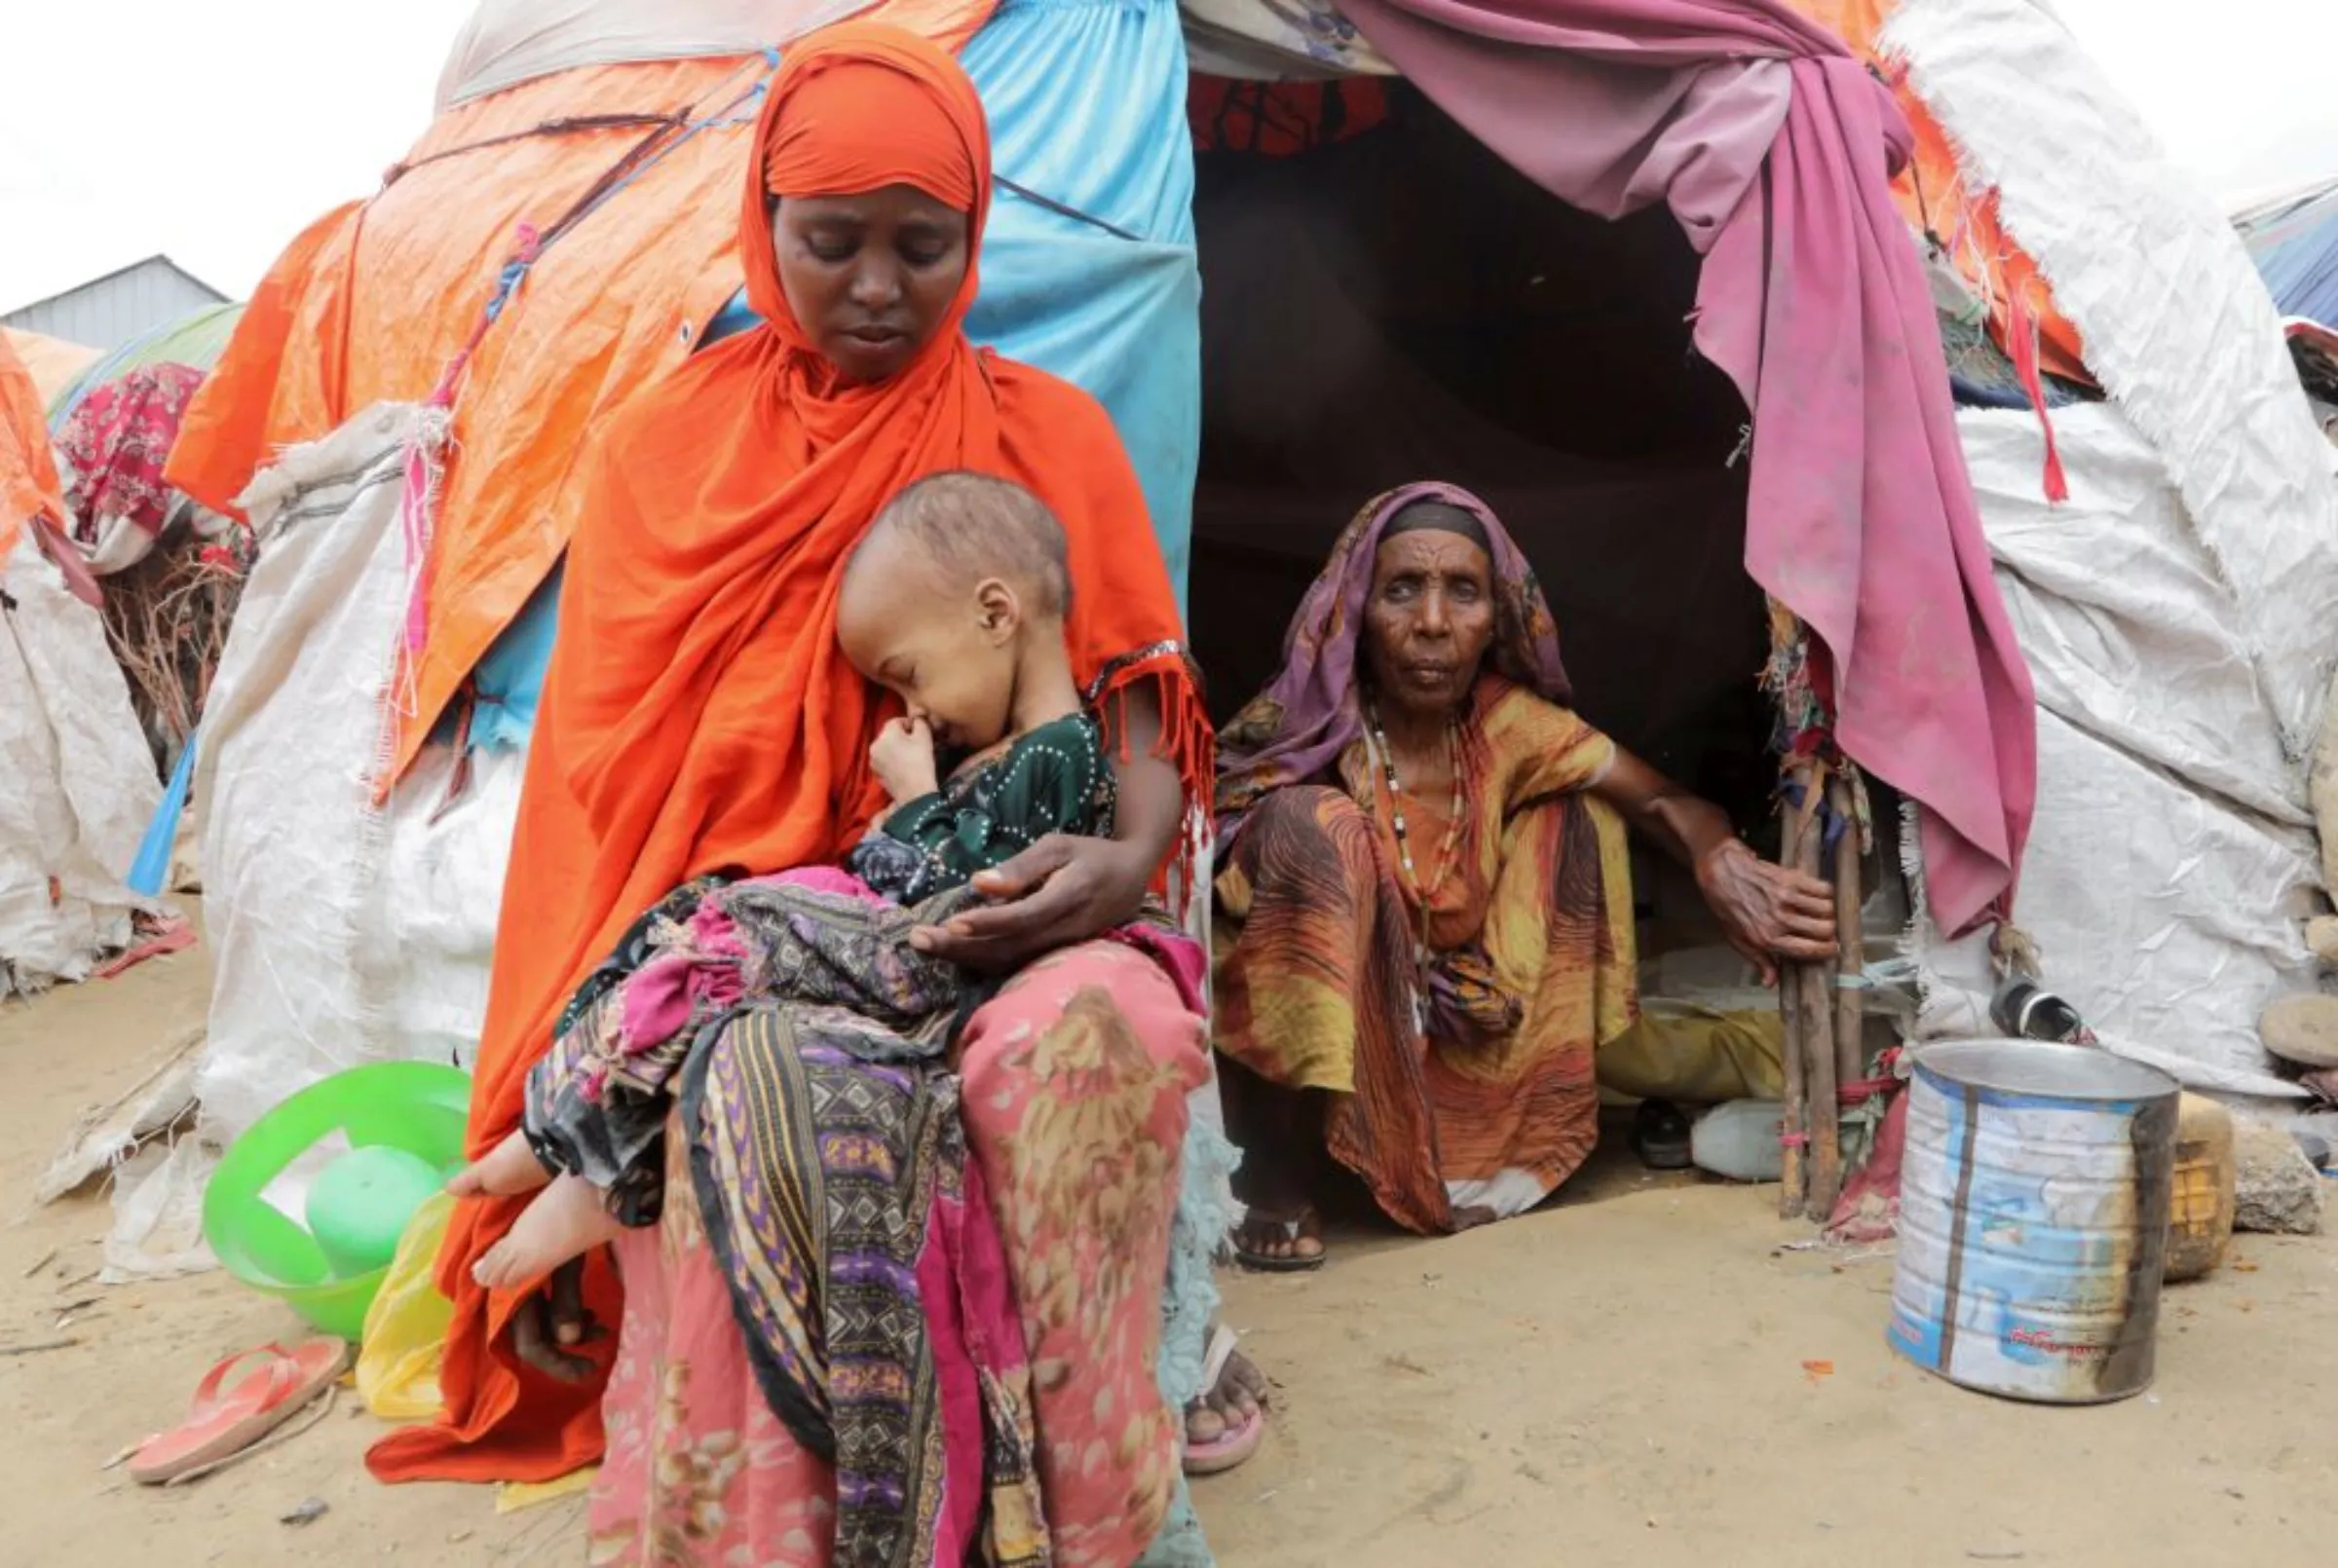 A Somali woman affected by the worsening drought due to failed rain seasons, holds her child, as her grandmother Habiba Osman looks on, outside their makeshift shelter at the Alla Futo camp for internally displaced people, in the outskirts of Mogadishu, Somalia September 23, 2022